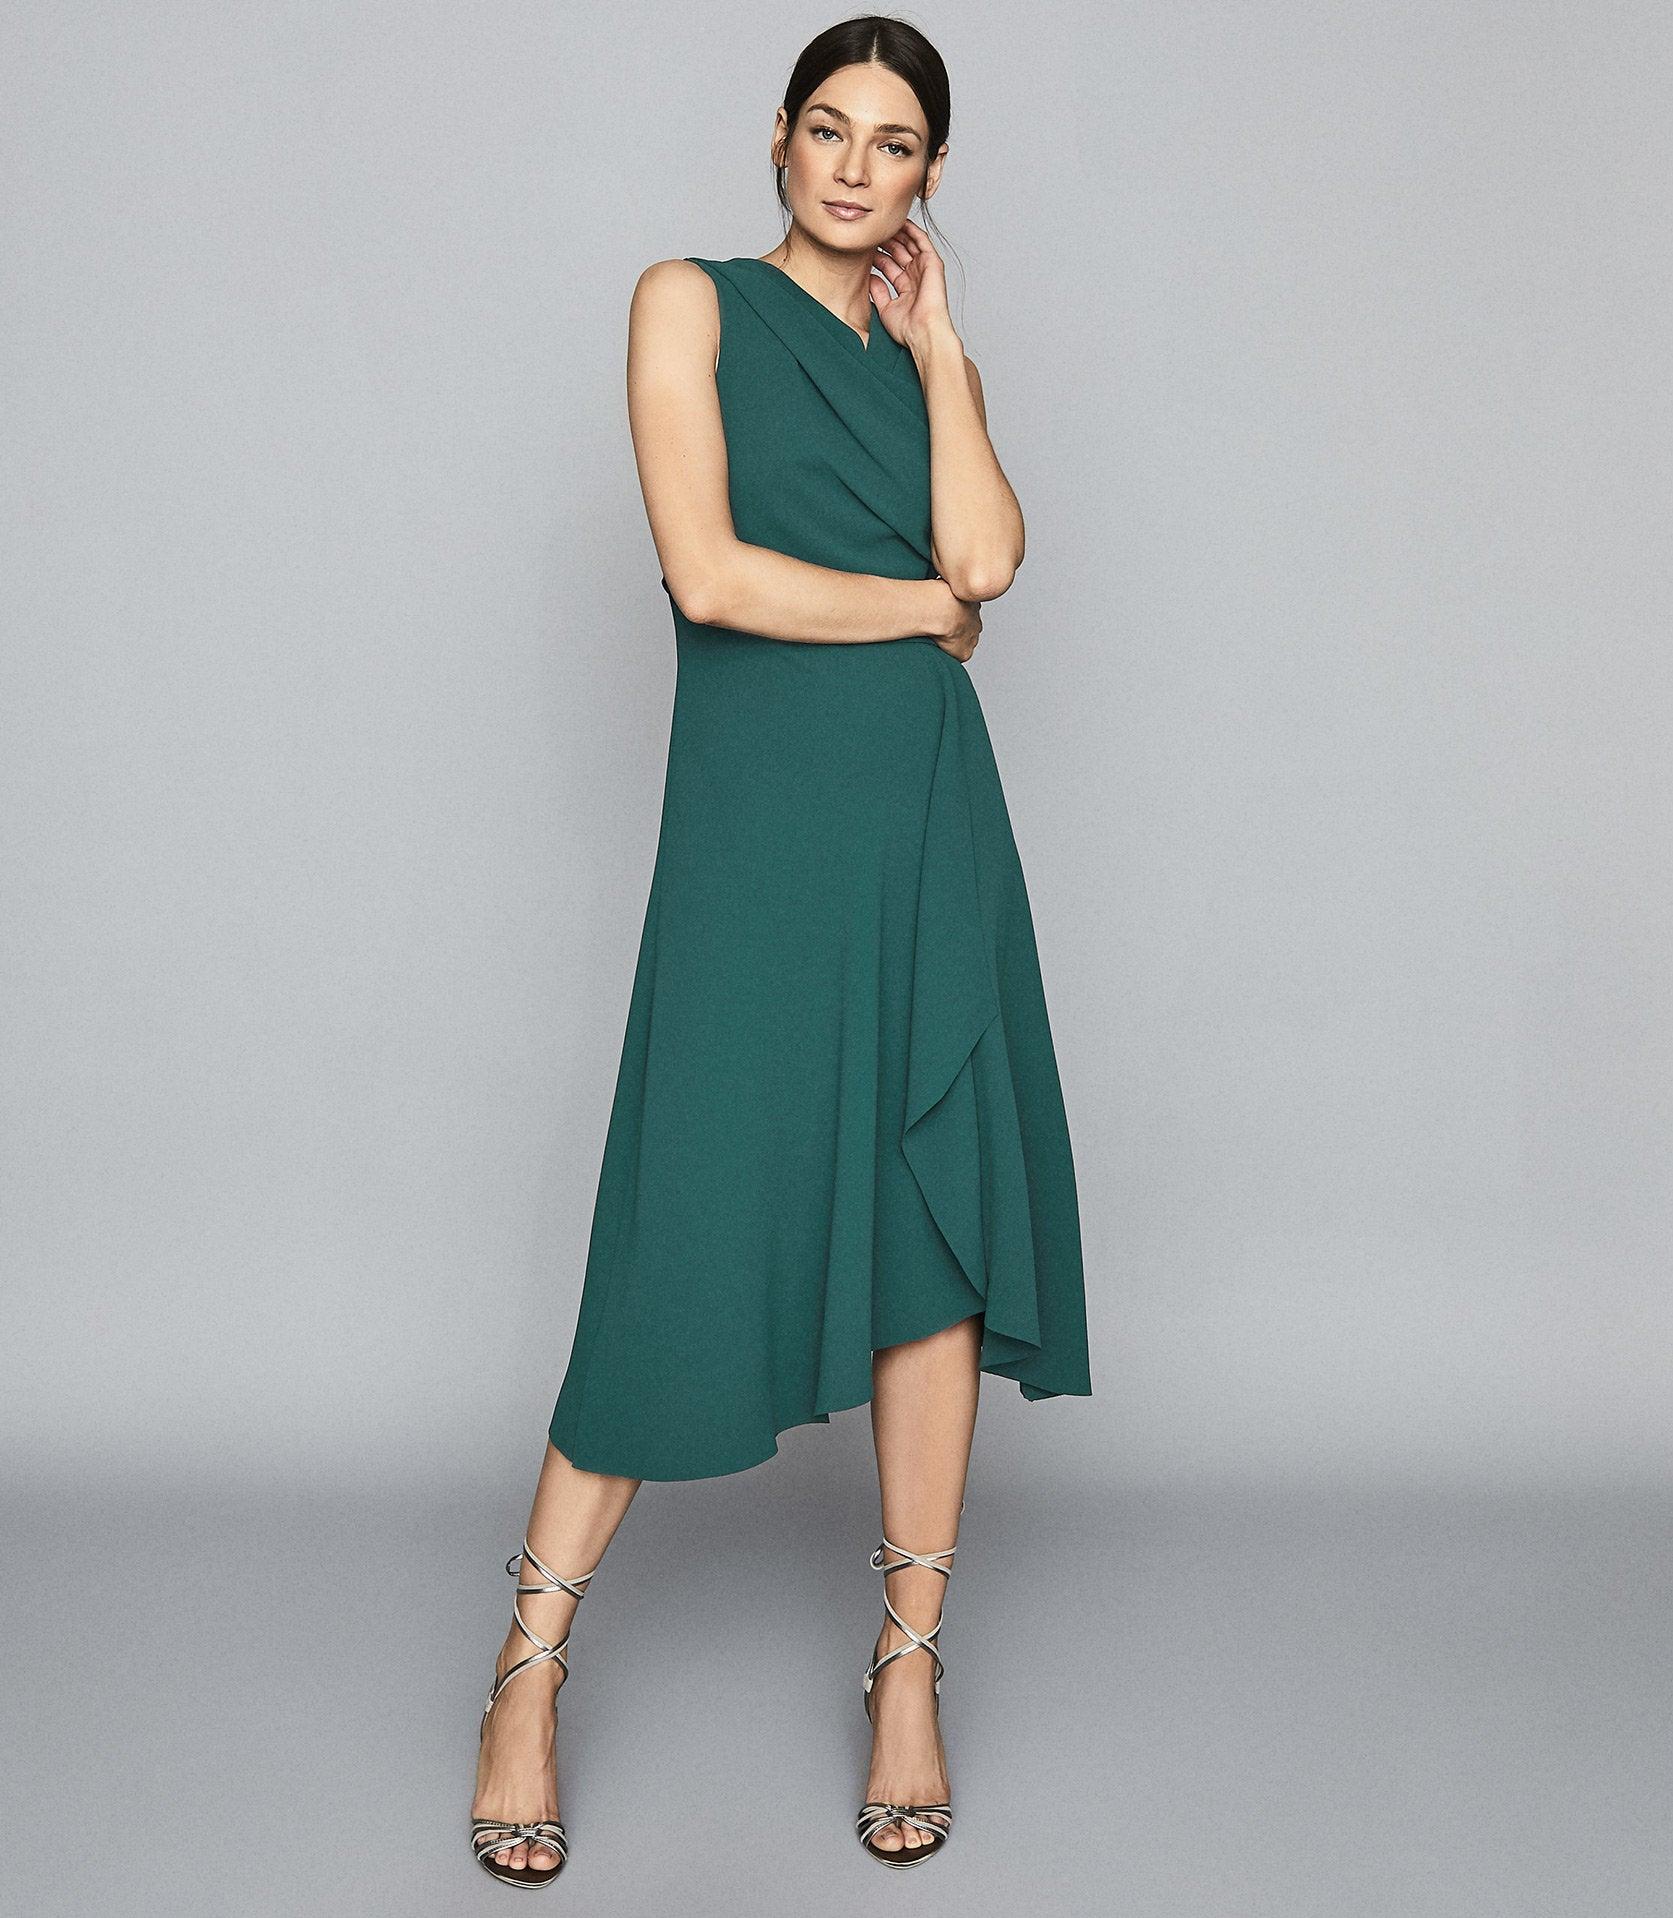 Reiss Synthetic Marling - Wrap Front Midi Dress in Teal (Green) - Lyst